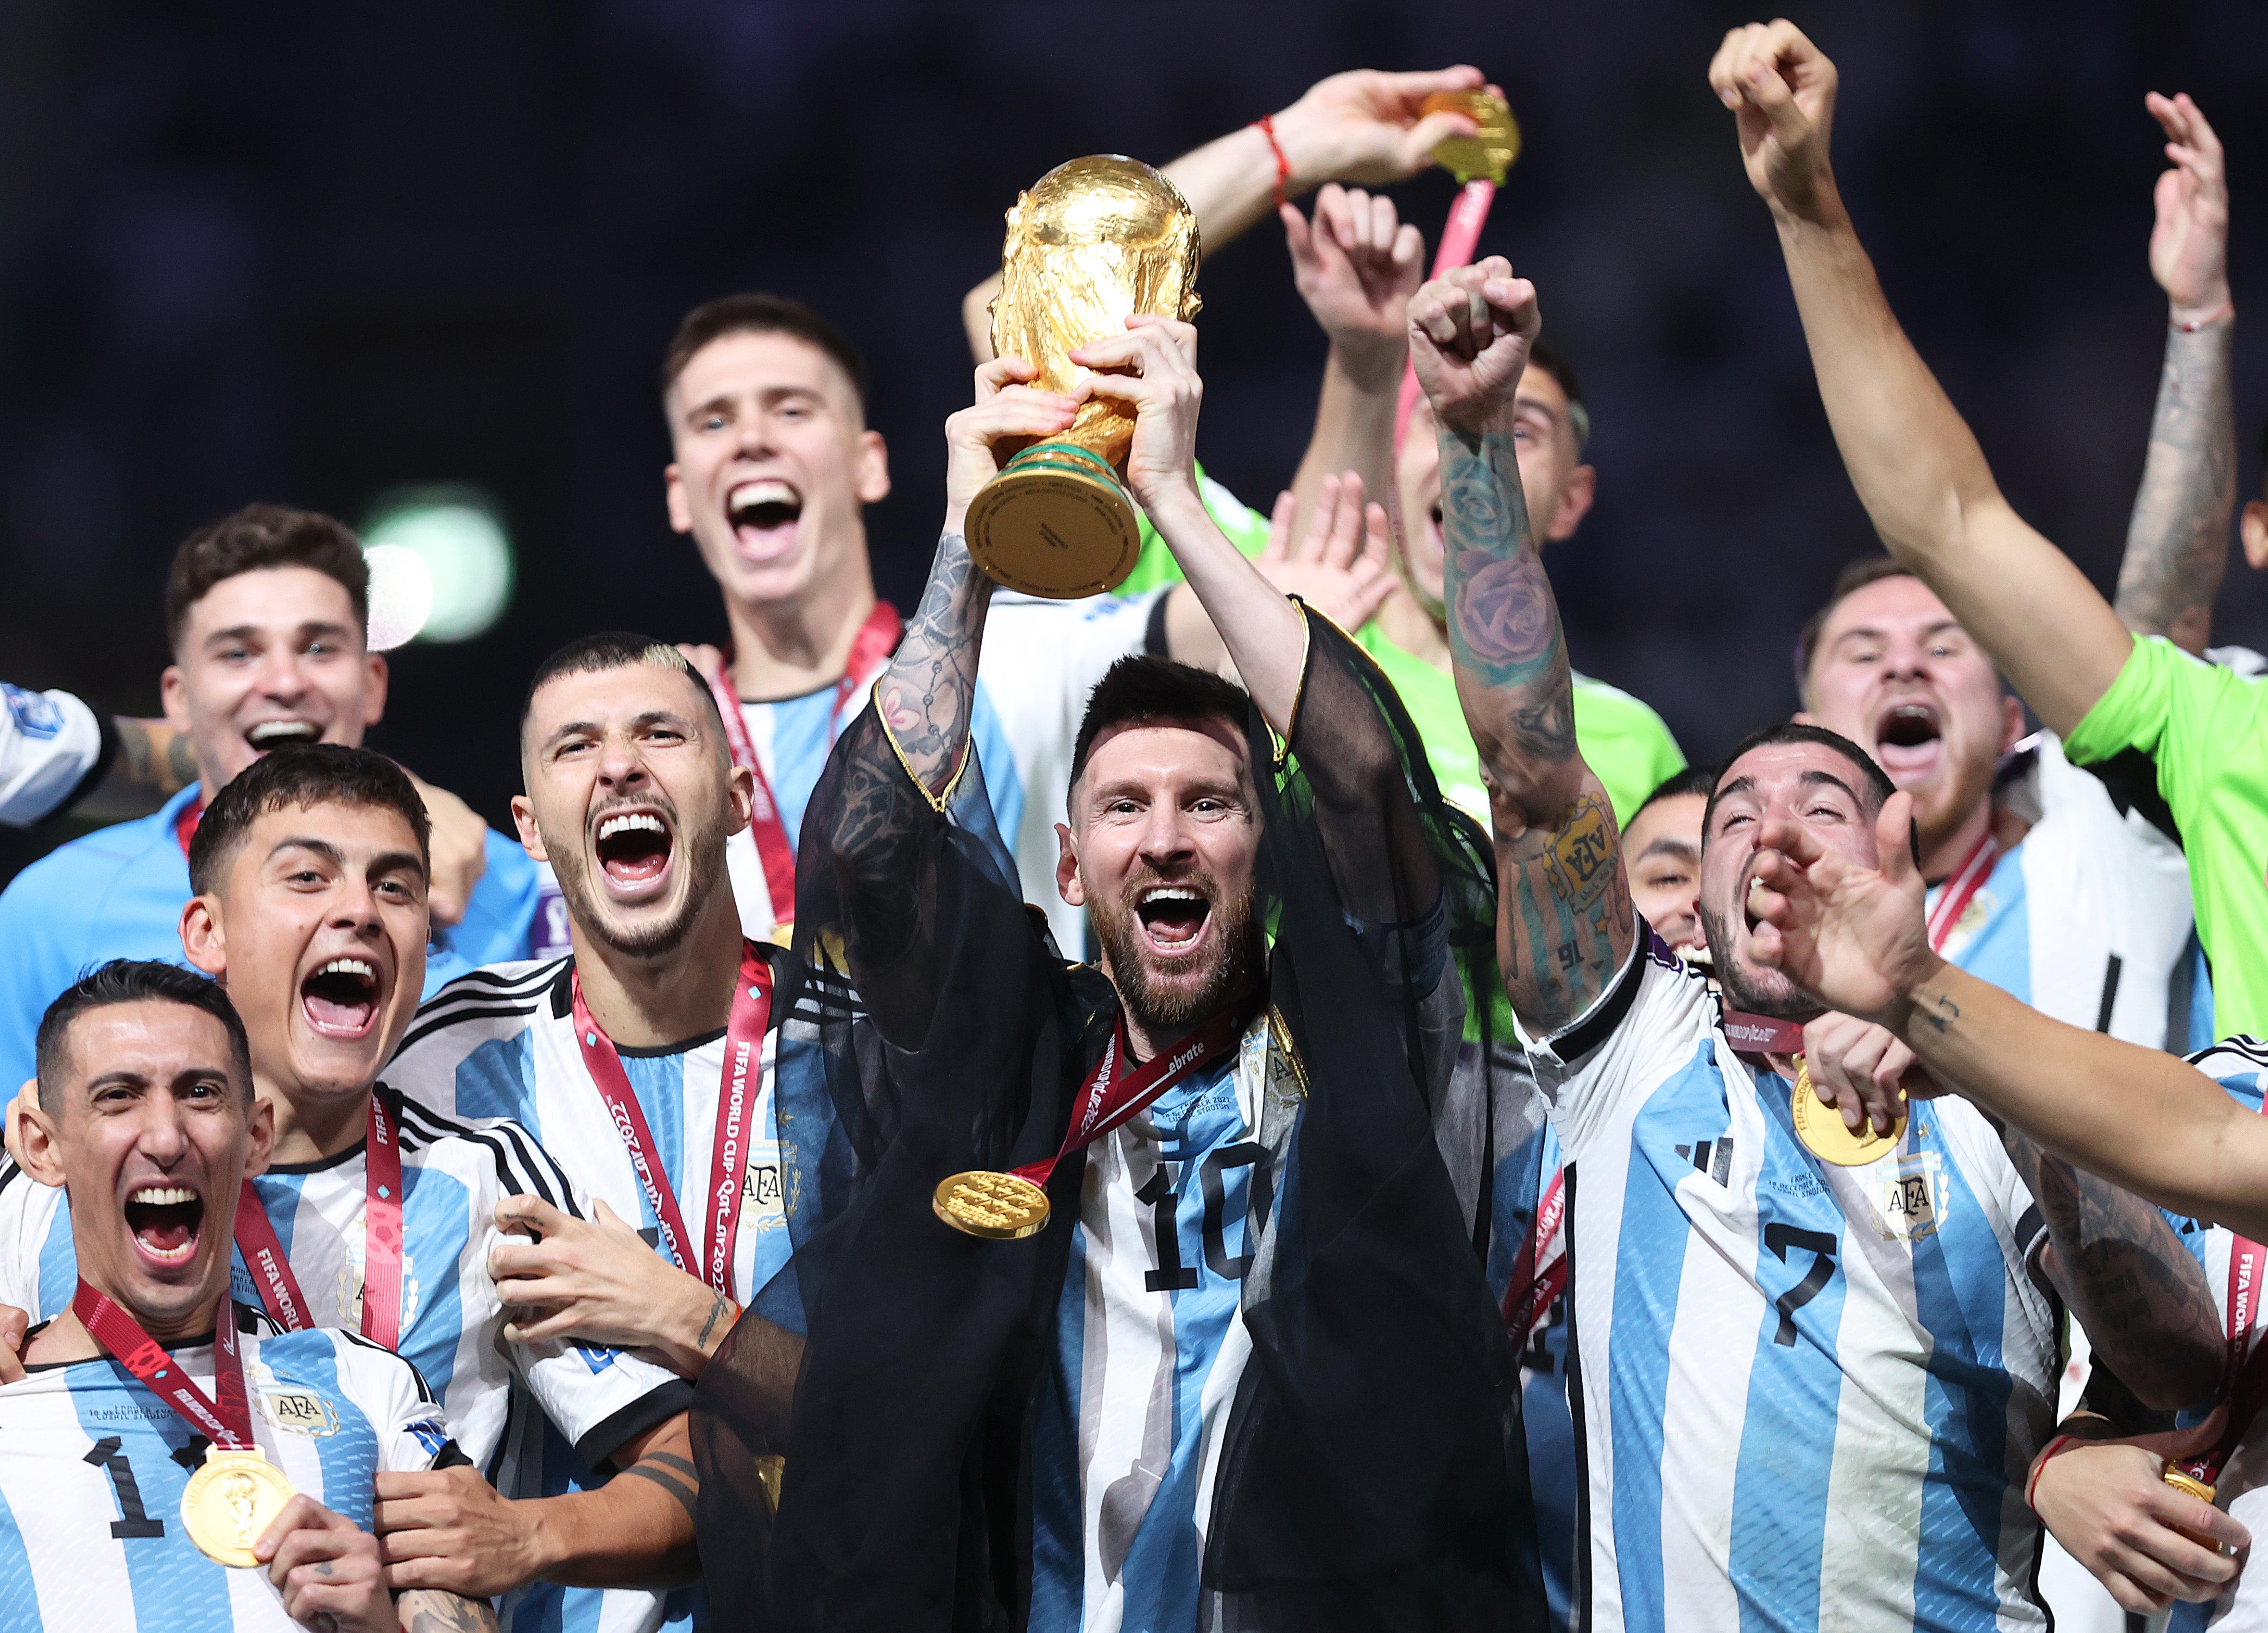 Lionel Messi lifts the Fifa World Cup trophy after Argentina’s penalty shootout win over France at Lusail Stadium on 18 December 2022 in Lusail City, Qatar